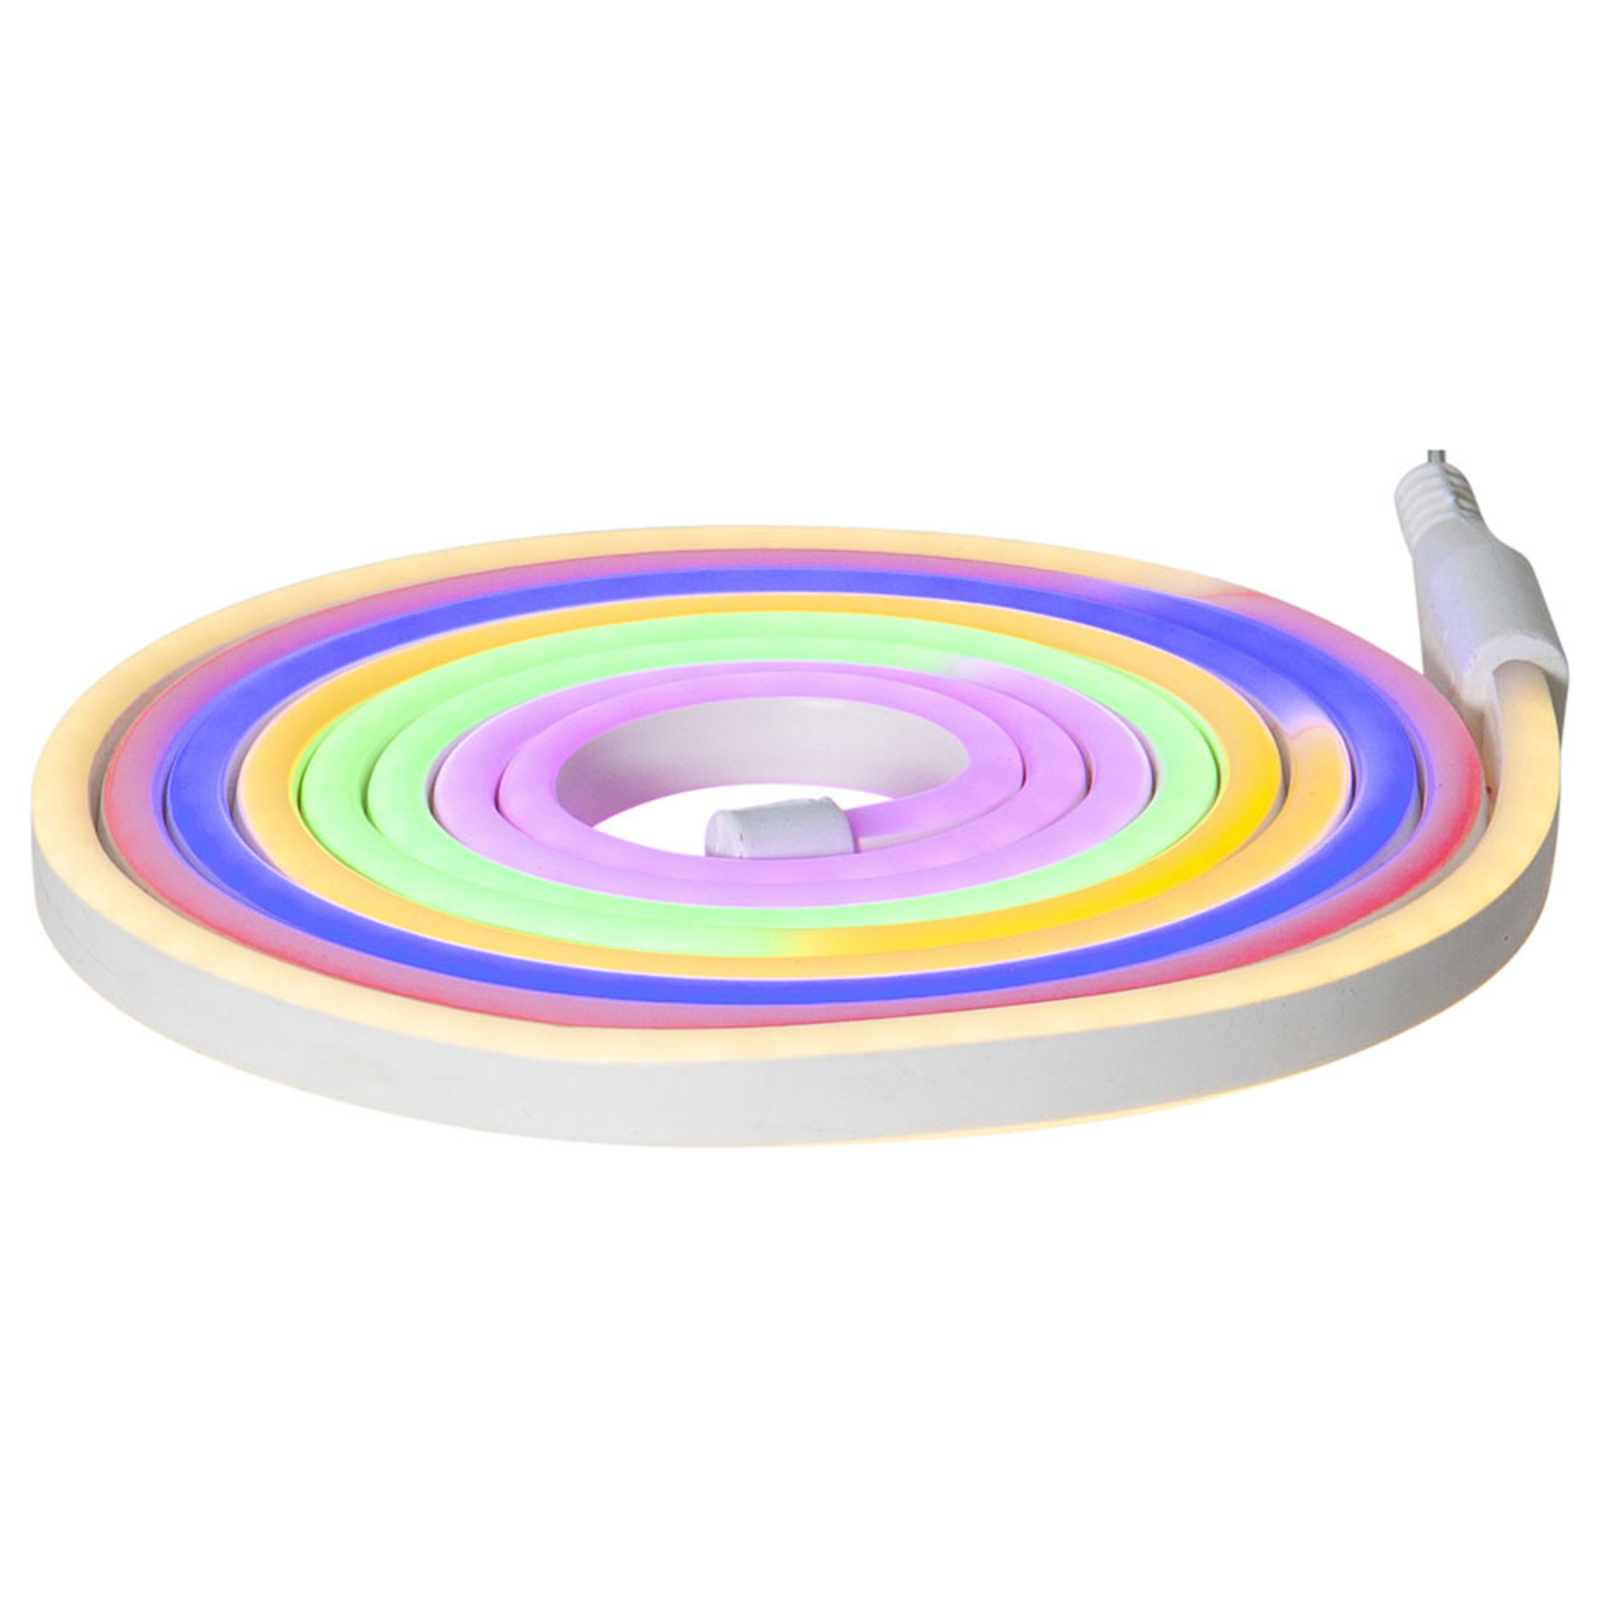 LED-Lichtschlauch Flatneon Multicolor